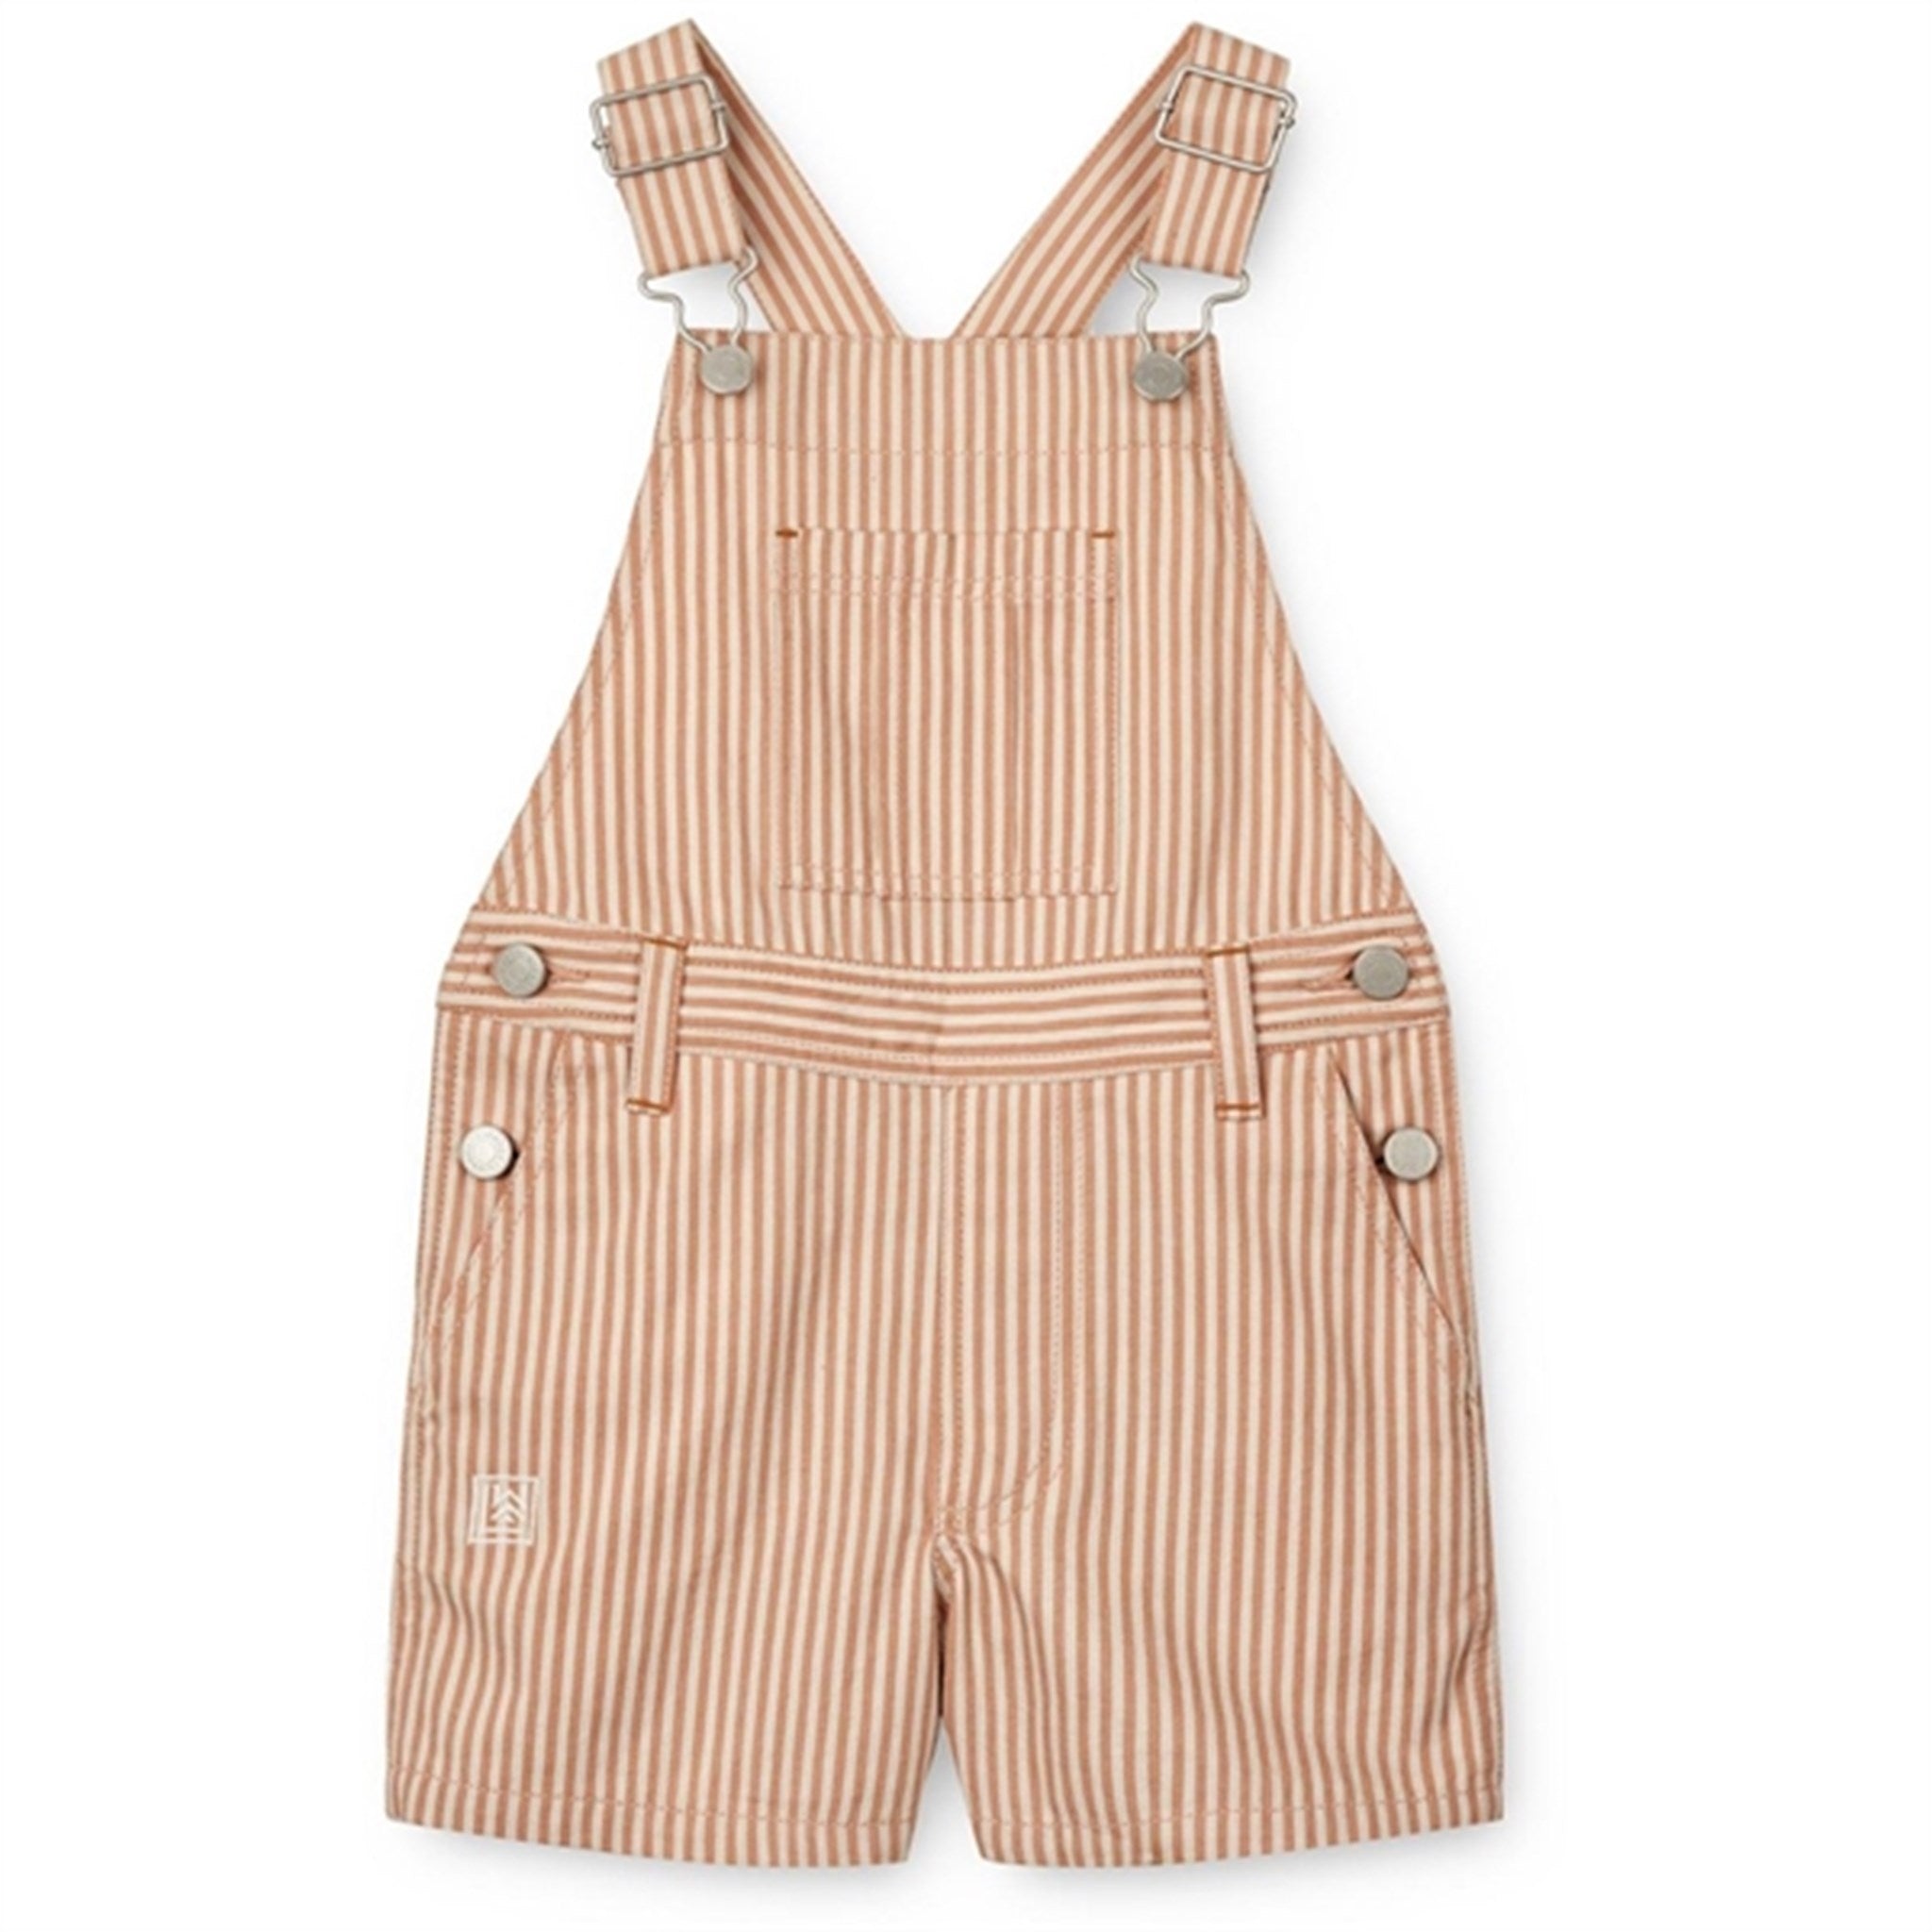 Liewood Y/D Stripe Tuscany Rose/Sandy Venedict Stripe Overall